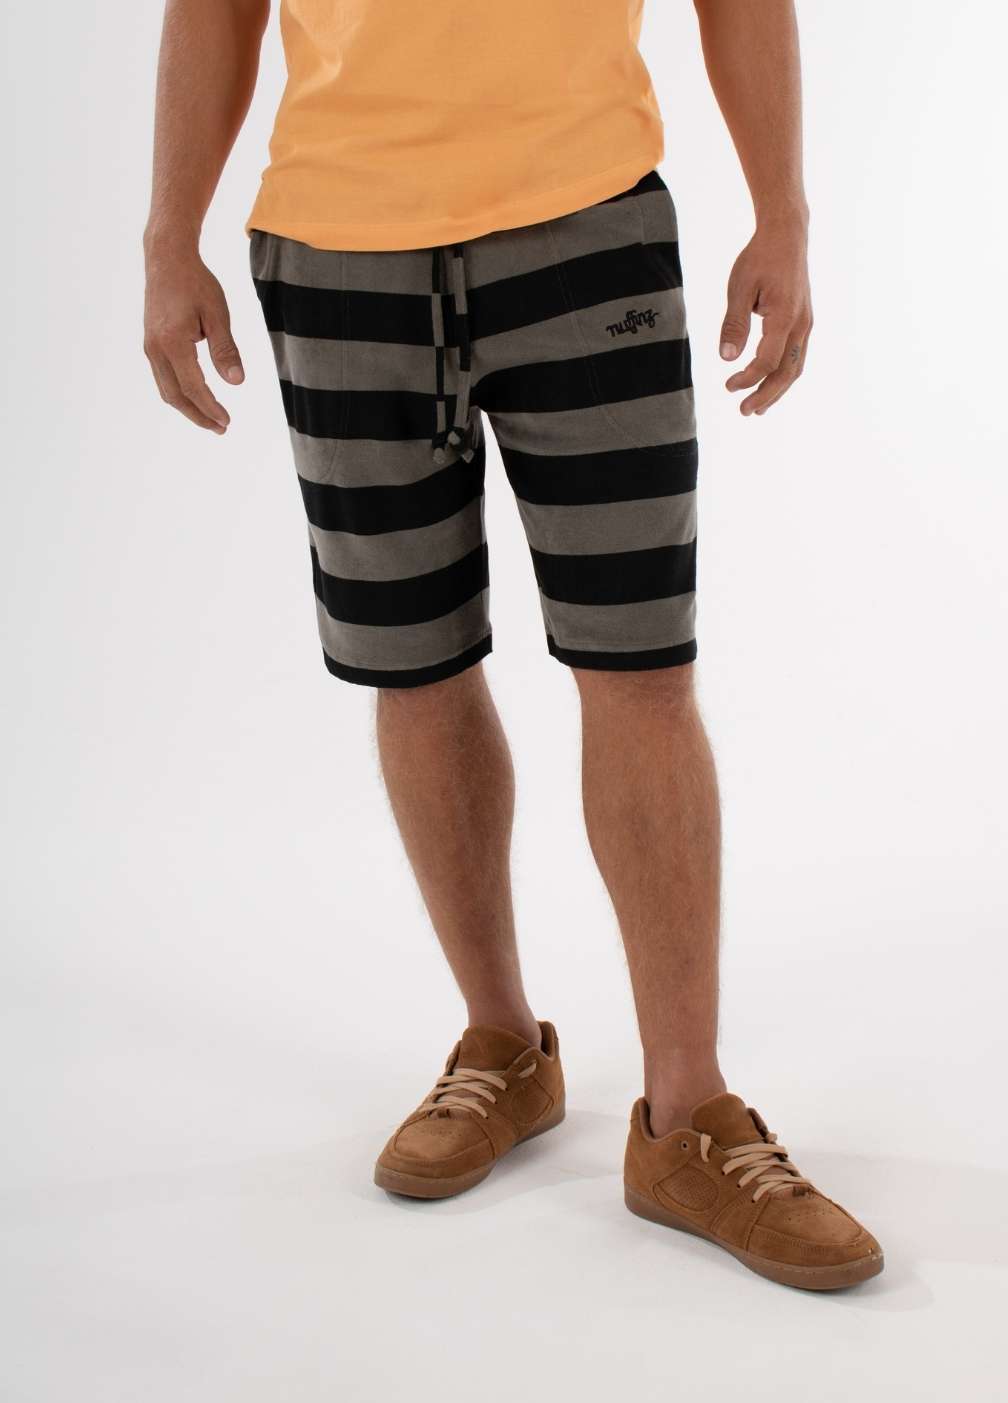 nuffinz striped shorts - SMOKEY OLIVE TOWEL SHORTS ST - 100% organic cotton - terry cloth - comfortable shorts for men - closeup side / front